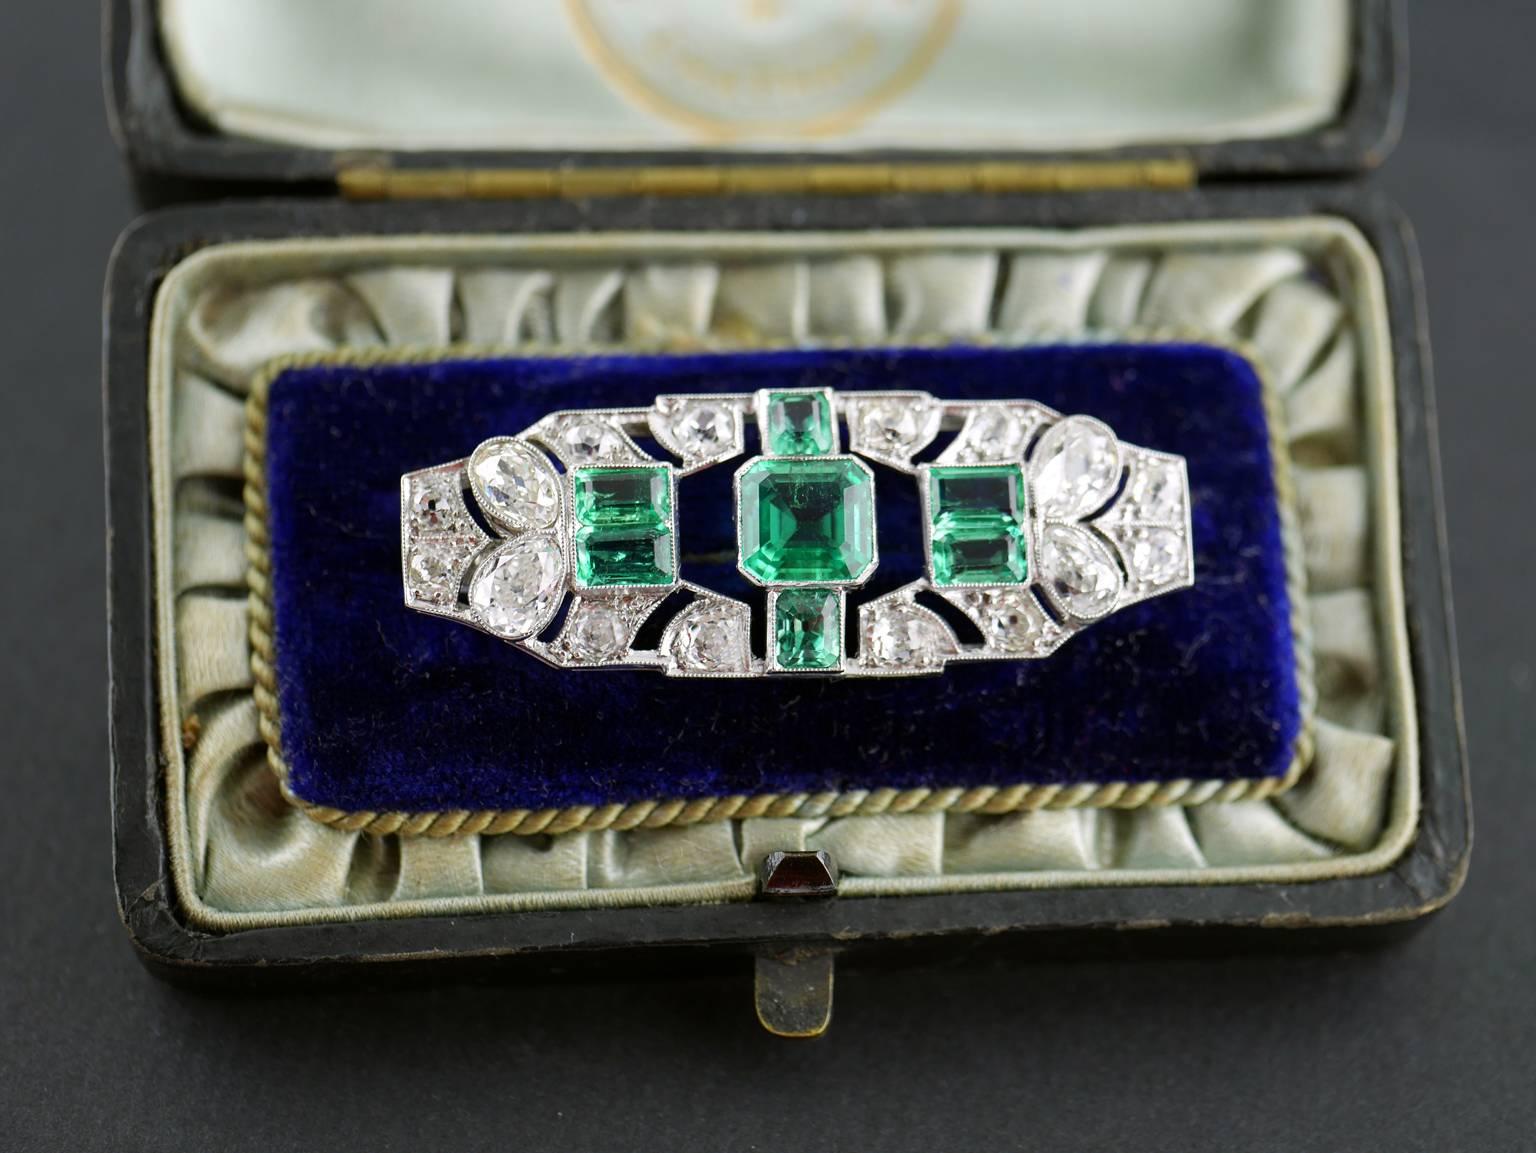 Art Deco emerald and diamond brooch mounted in platinum circa 1930

Central emerald 1.70 carats Certificated, Colombian, natural colour with minor clarity enhancement. Surrounded on each side with a total of 6 emeralds approx weight 4.5 carats.

The